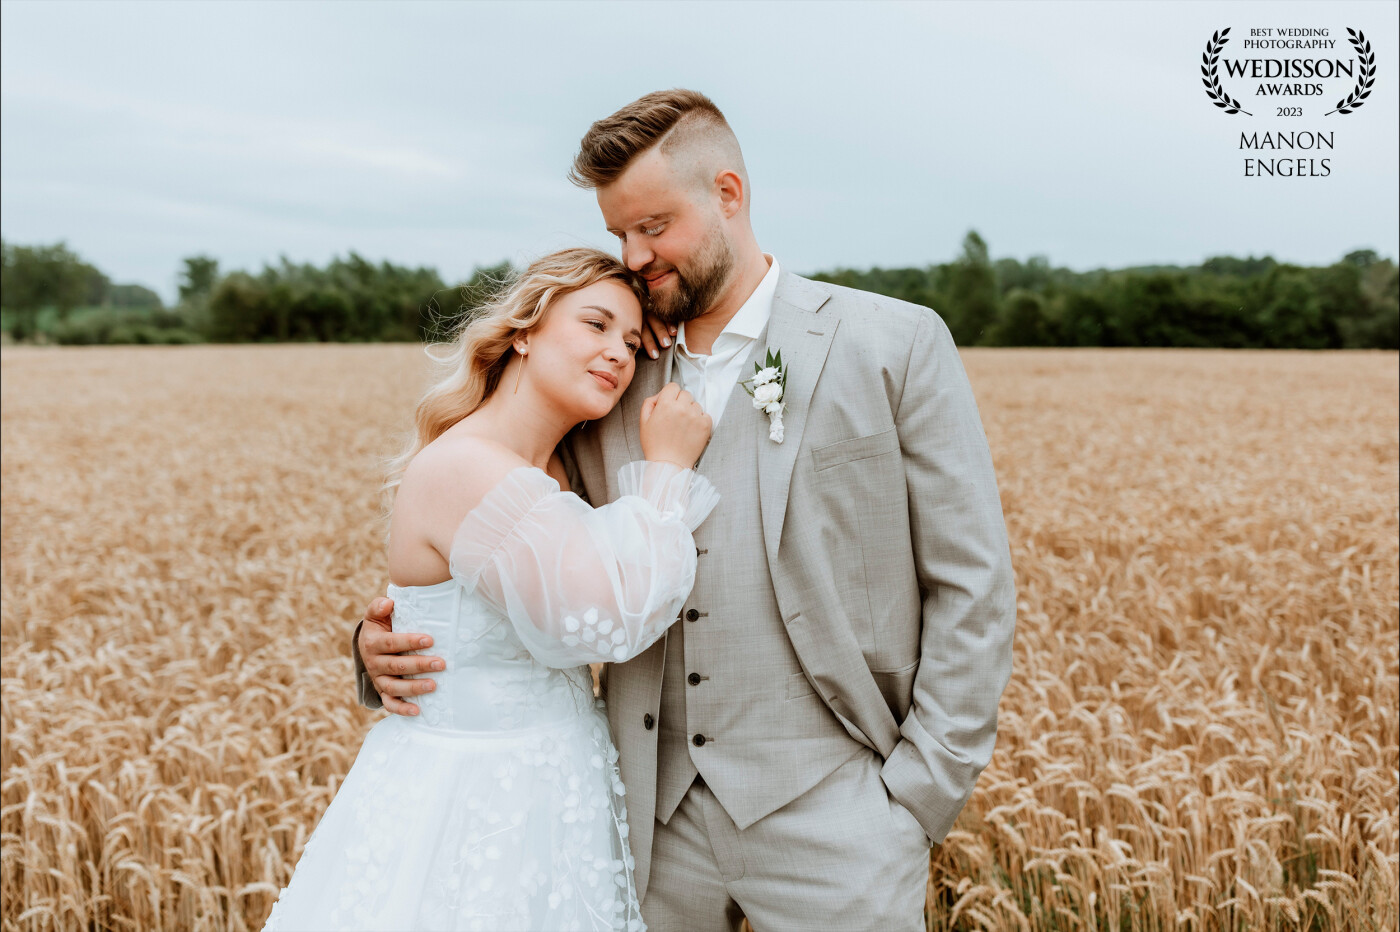 We didn’t really have a place in mind to do the coupleshoot for the wedding of Nathalie and Wouter. When I was driving through the fields on my way to church I immediately saw some opportunities there. The couple had such a natural flair, it was impossible to make bad photos.